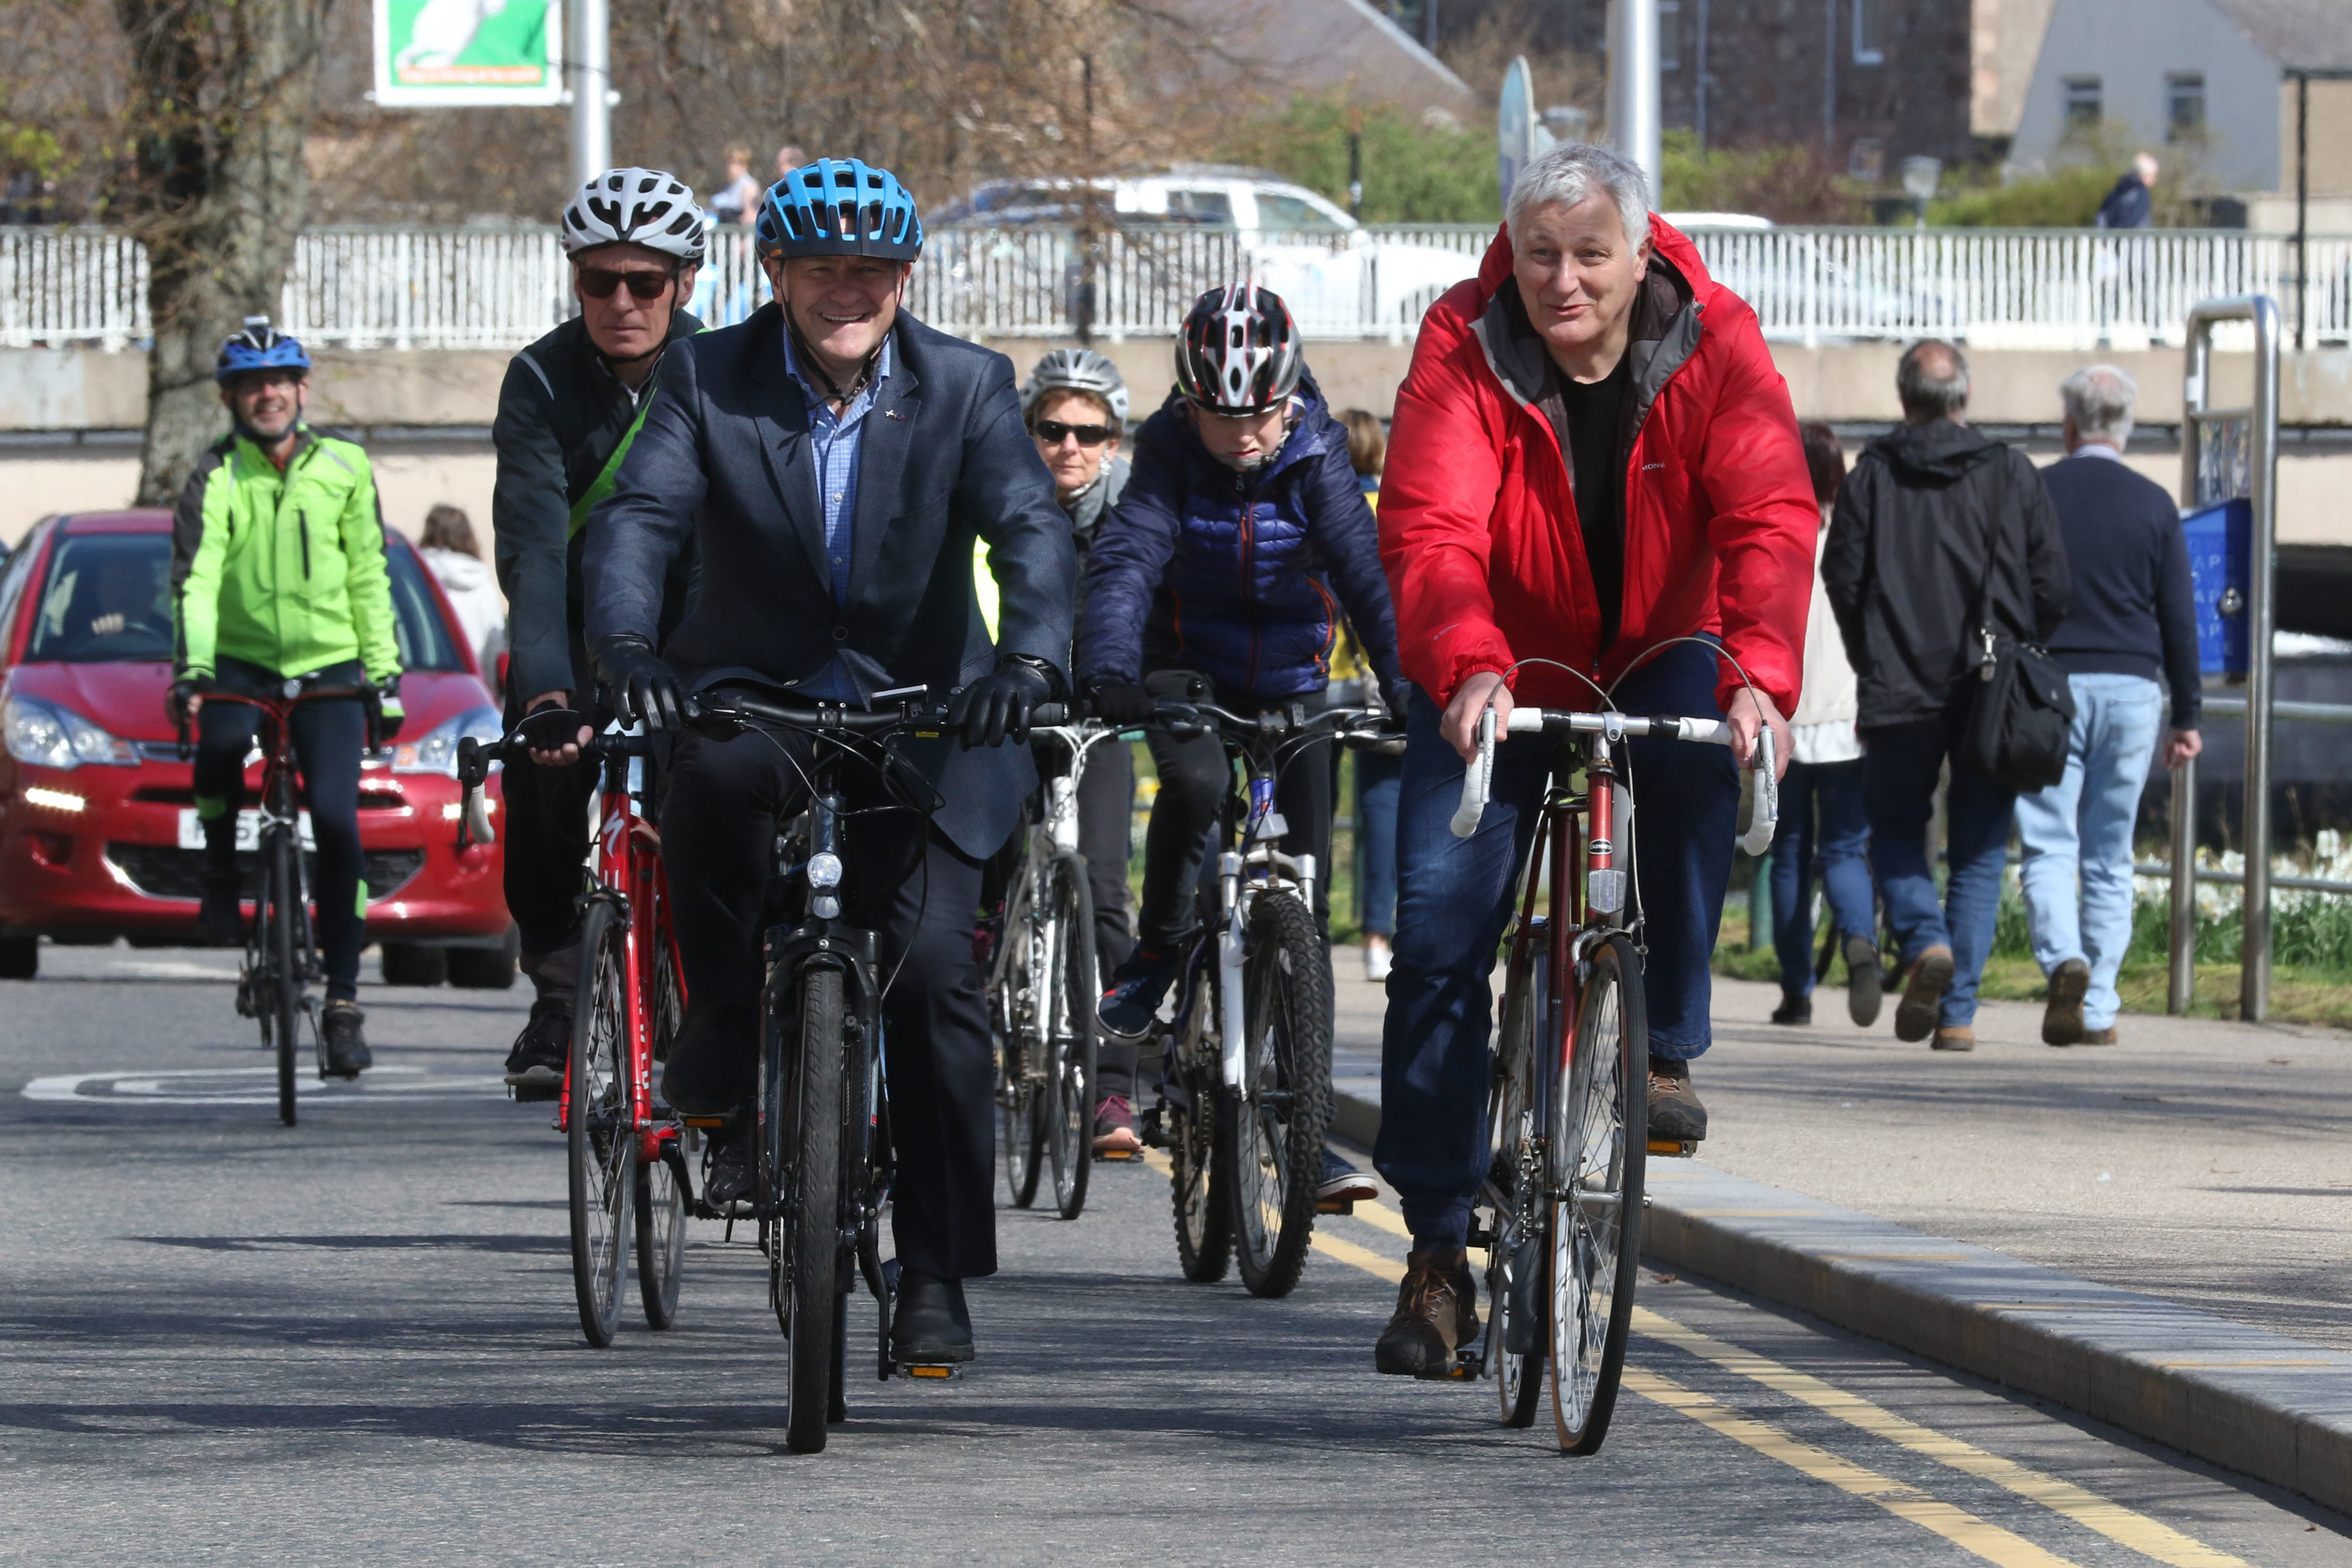 Drew Hendry MP and John Finnie MSP lead the procession of cyclists across town to the Highland Council HQ.